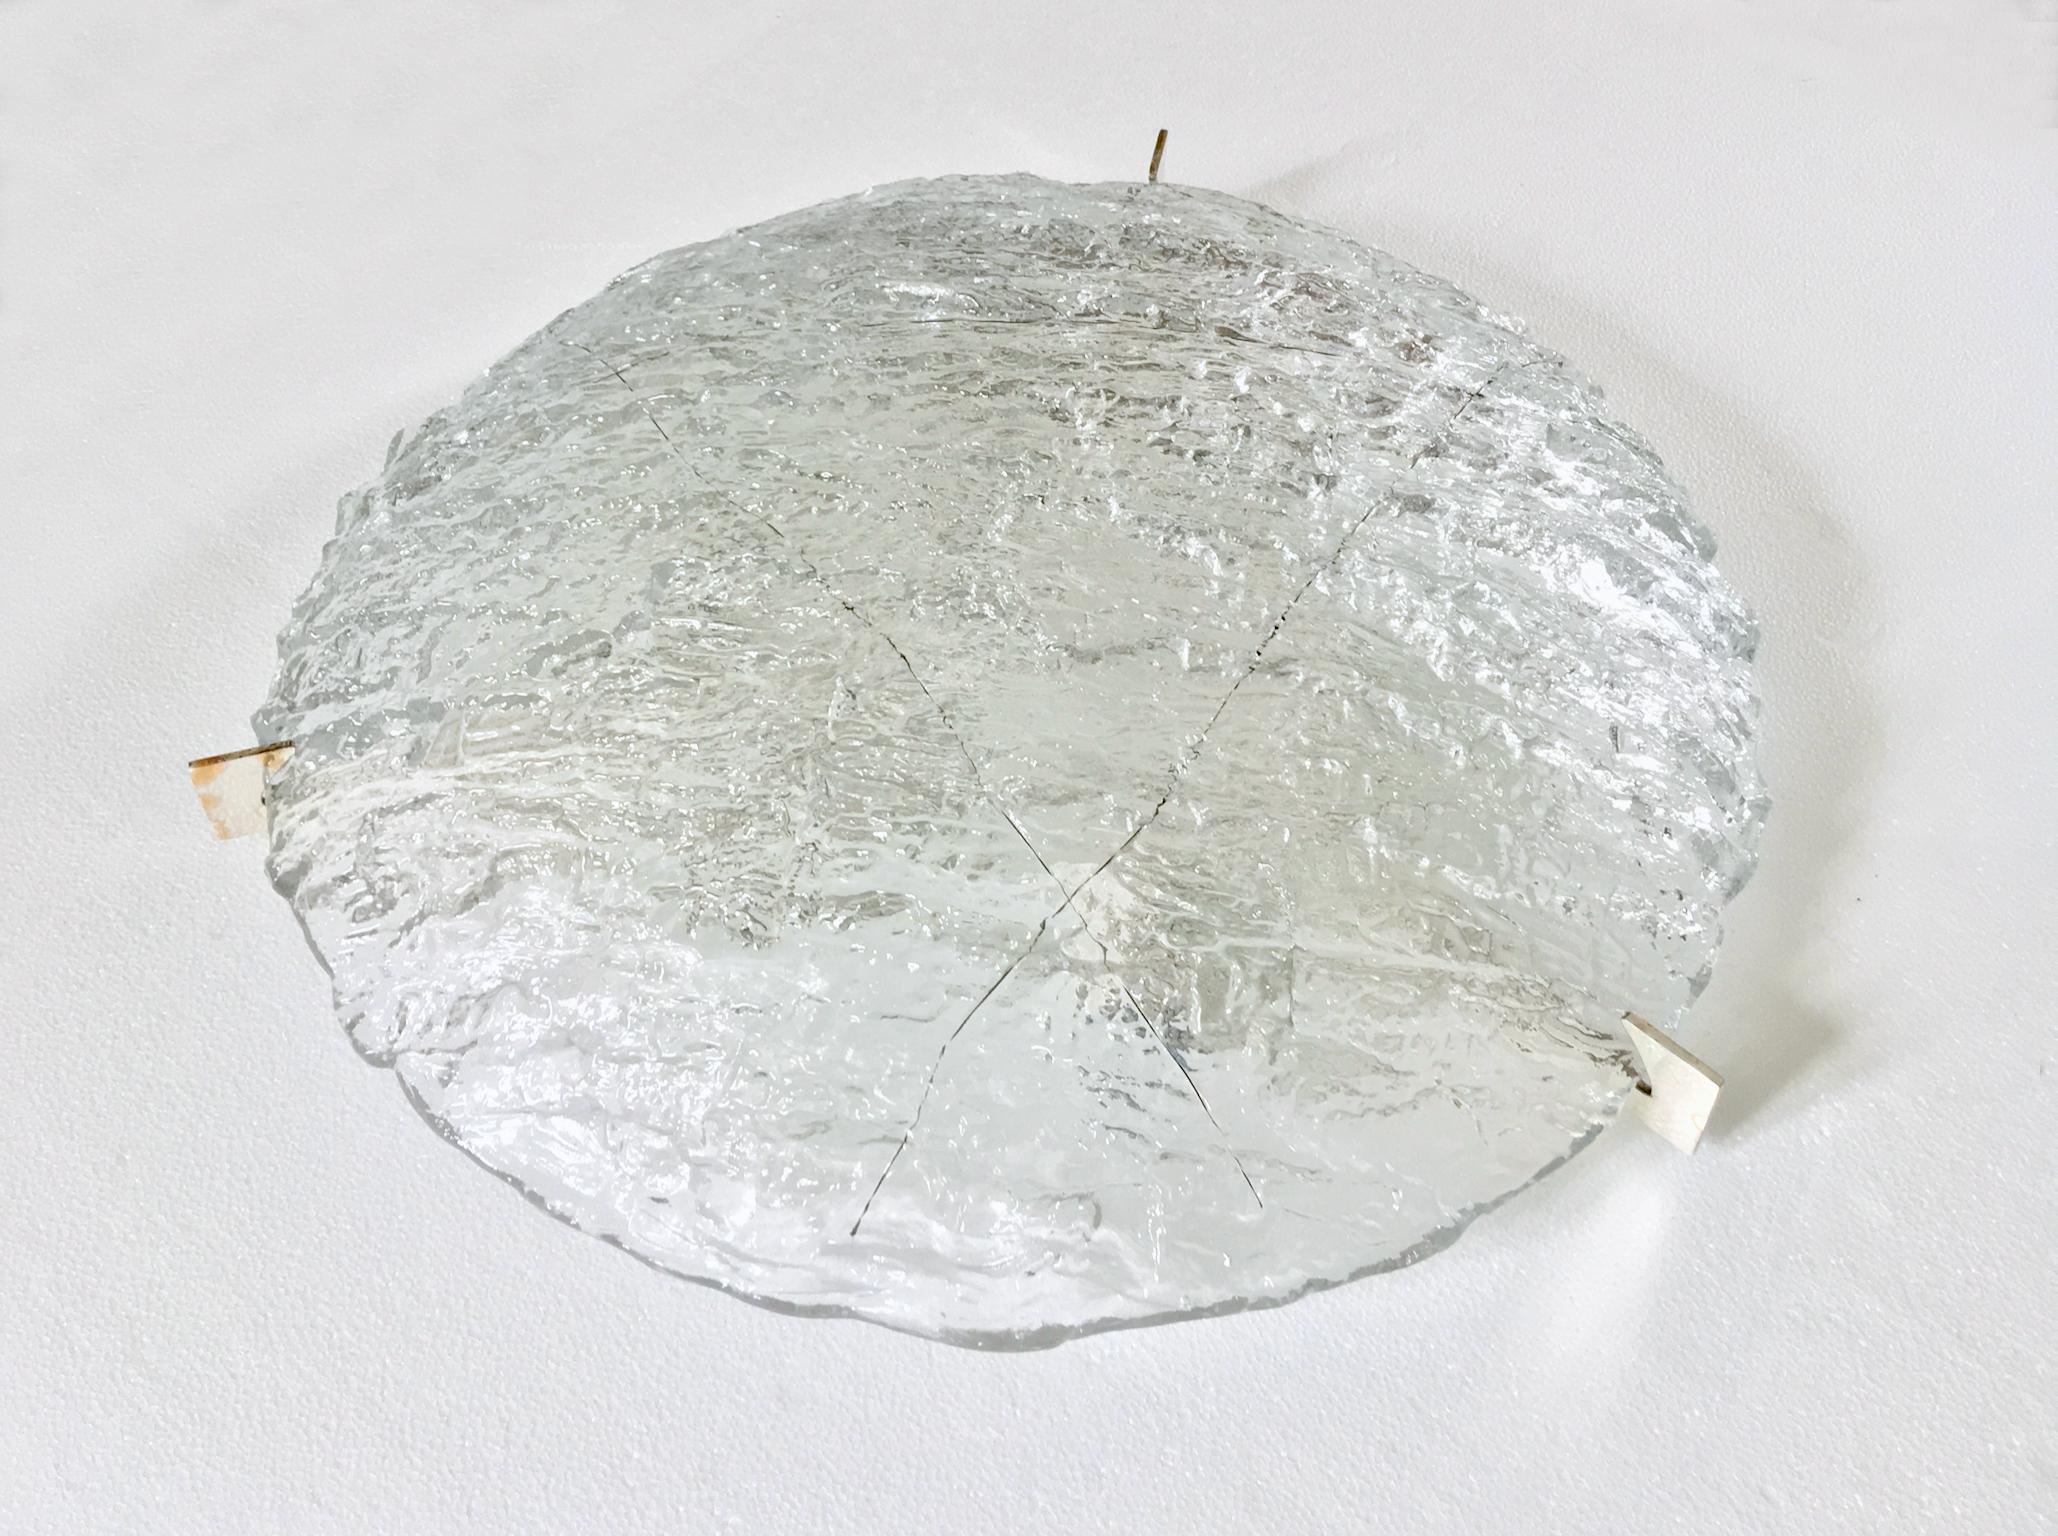 Large circular glass flush mount in heavily textured clear glass by Kaiser, Germany, mid-20th century.

Single piece of handcrafted textured clear glass, incorporating three metal wires and held in place by three silver-plated brackets. A